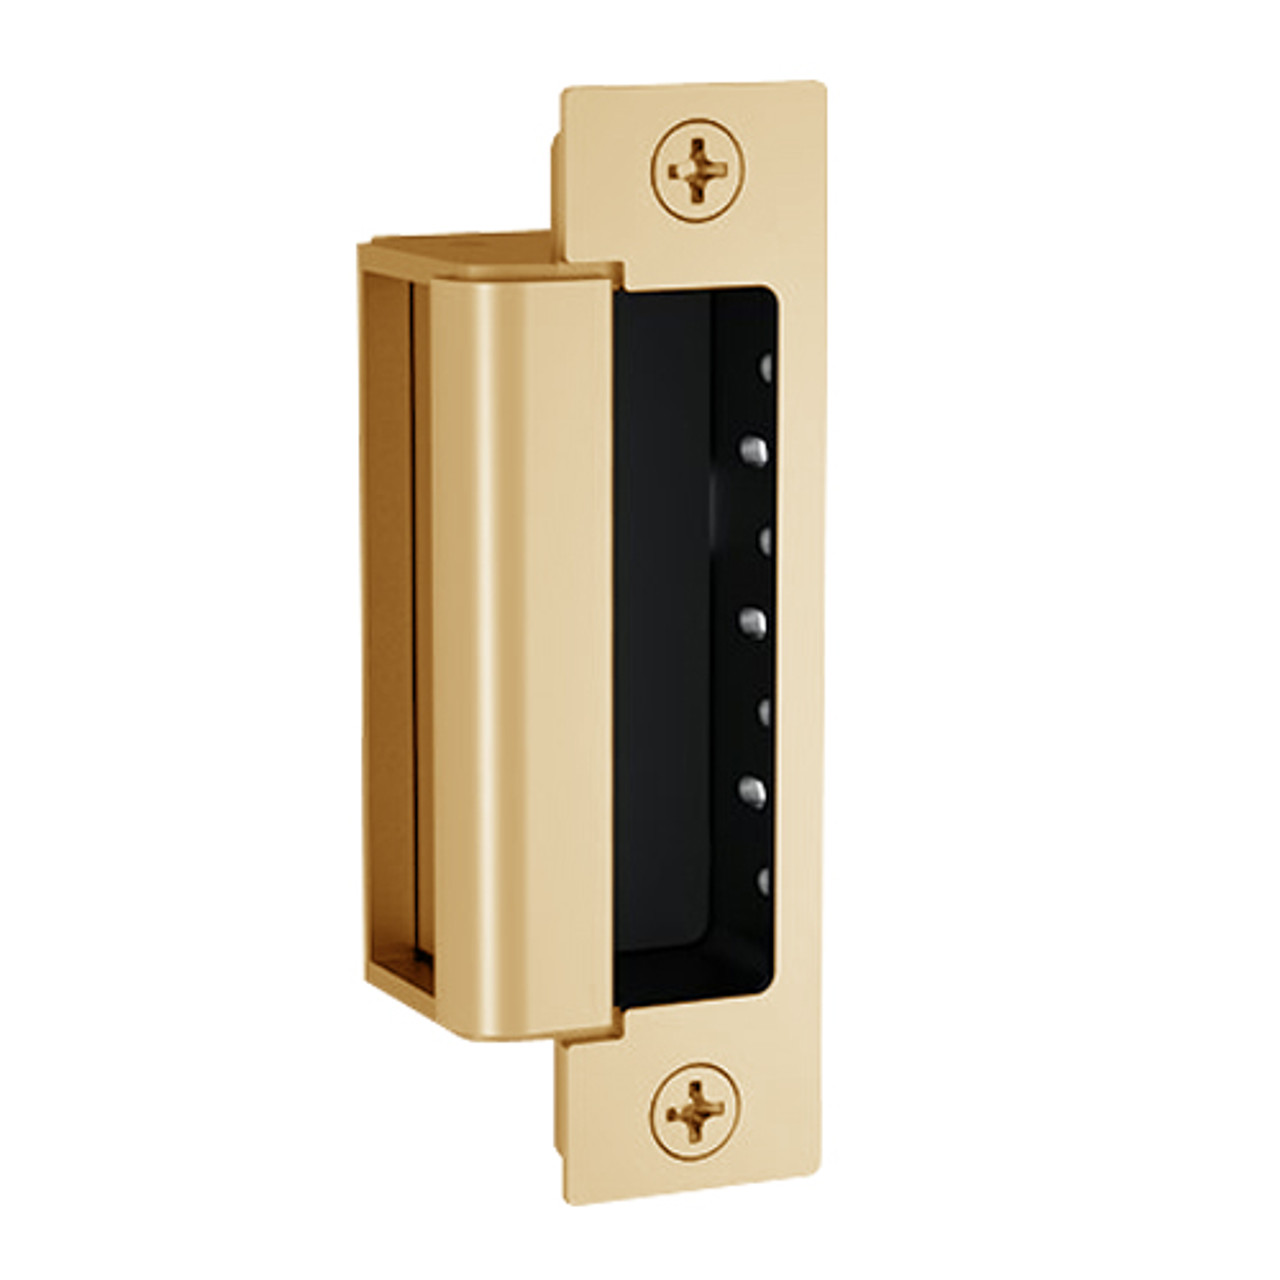 1600-CS-LM-612 Hes 1600 Series Dynamic Complete Low Profile Electric Strike for Latchbolt and Deadbolt Lock with Lock Monitor in Satin Bronze